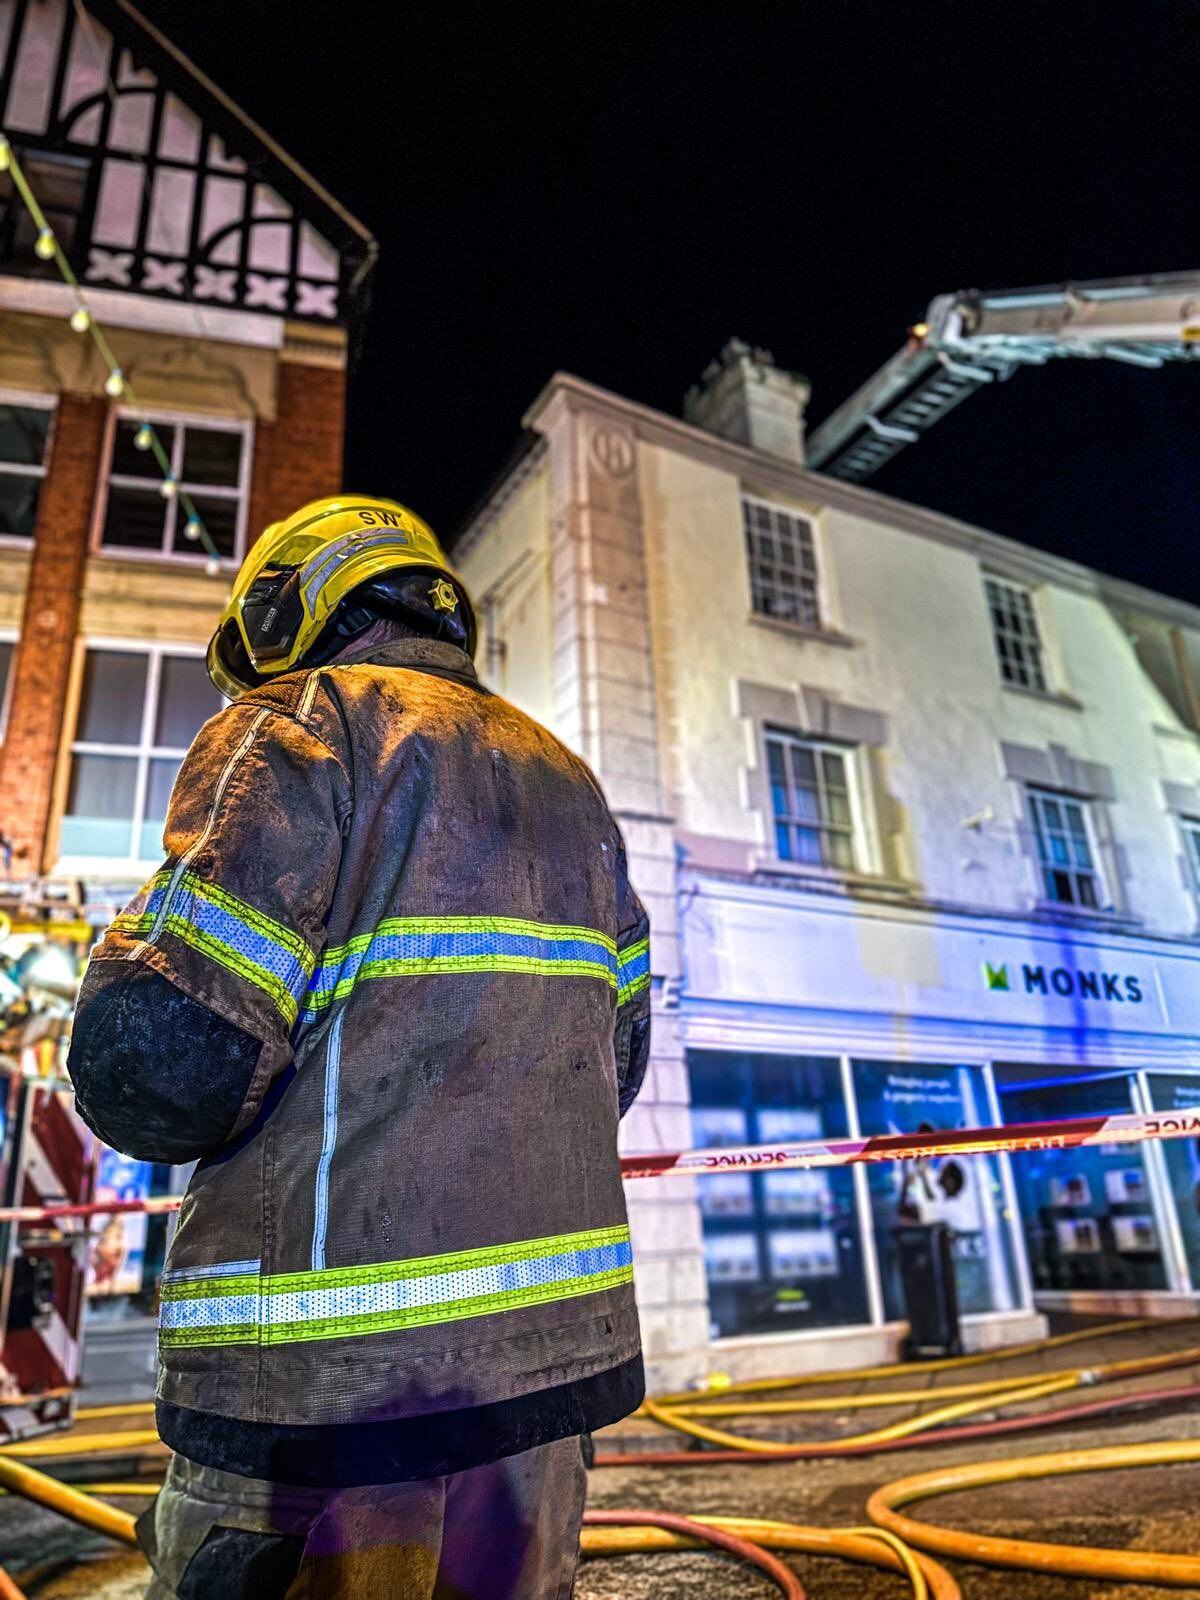 Six crews were dispatched to help deal with the incident. Picture: James Lewis - Shropshire Fire and Rescue Service